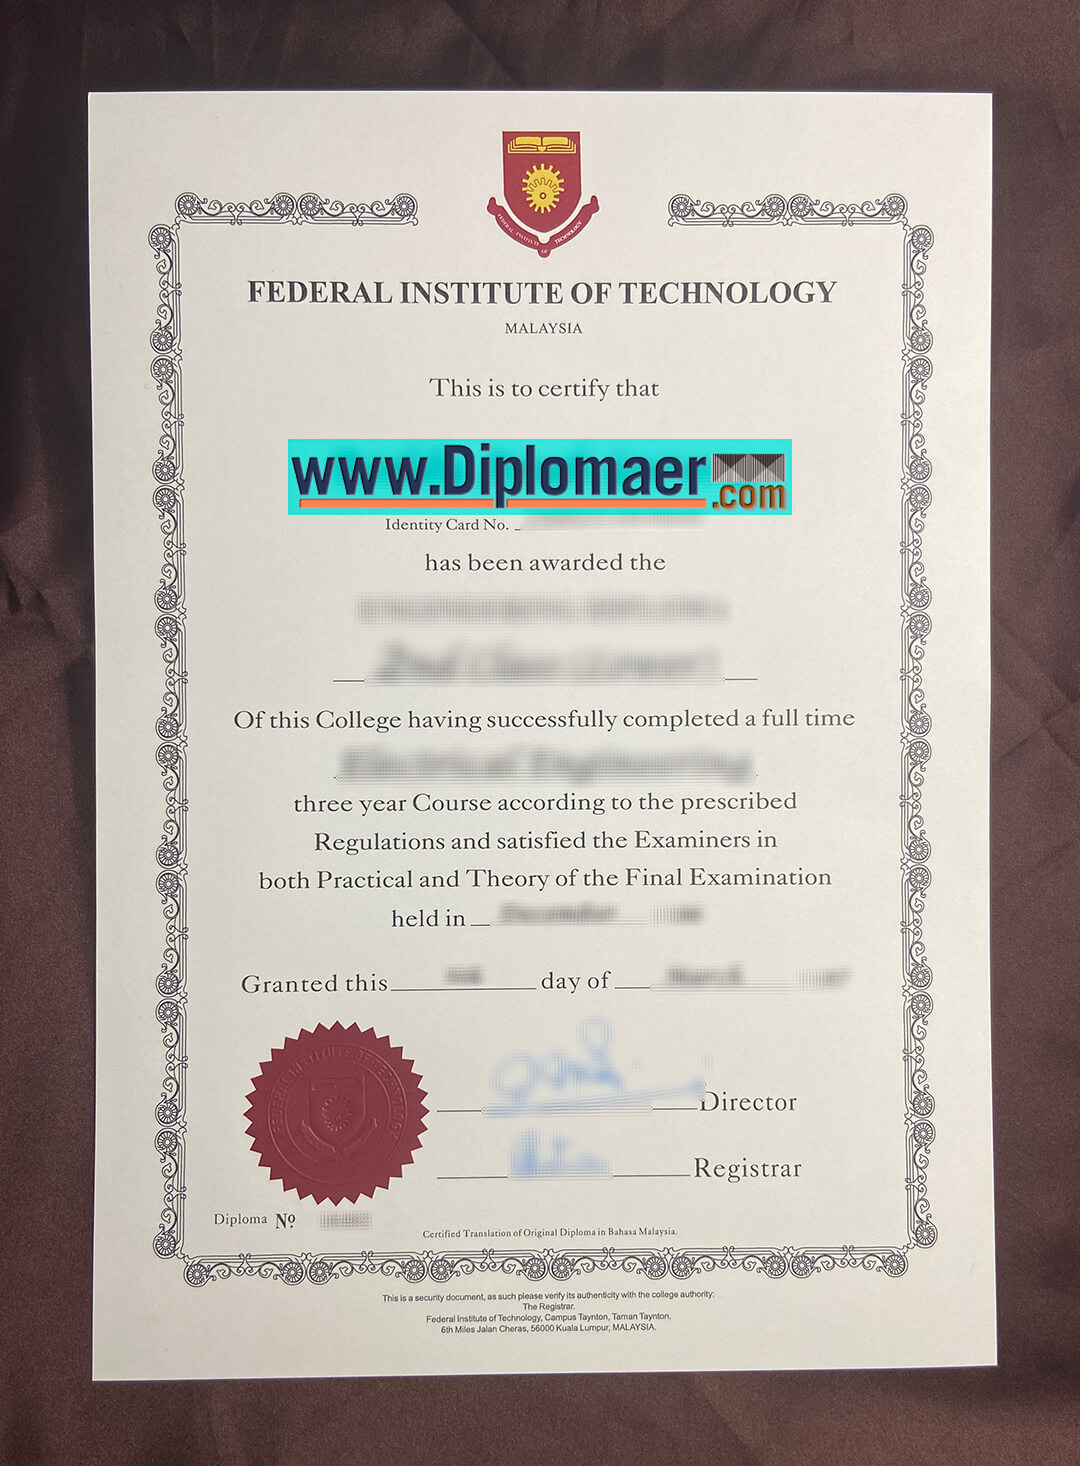 FIT fake diploma - The fastest way to buy a fake Federal Institute of Technology diploma from Malaysia